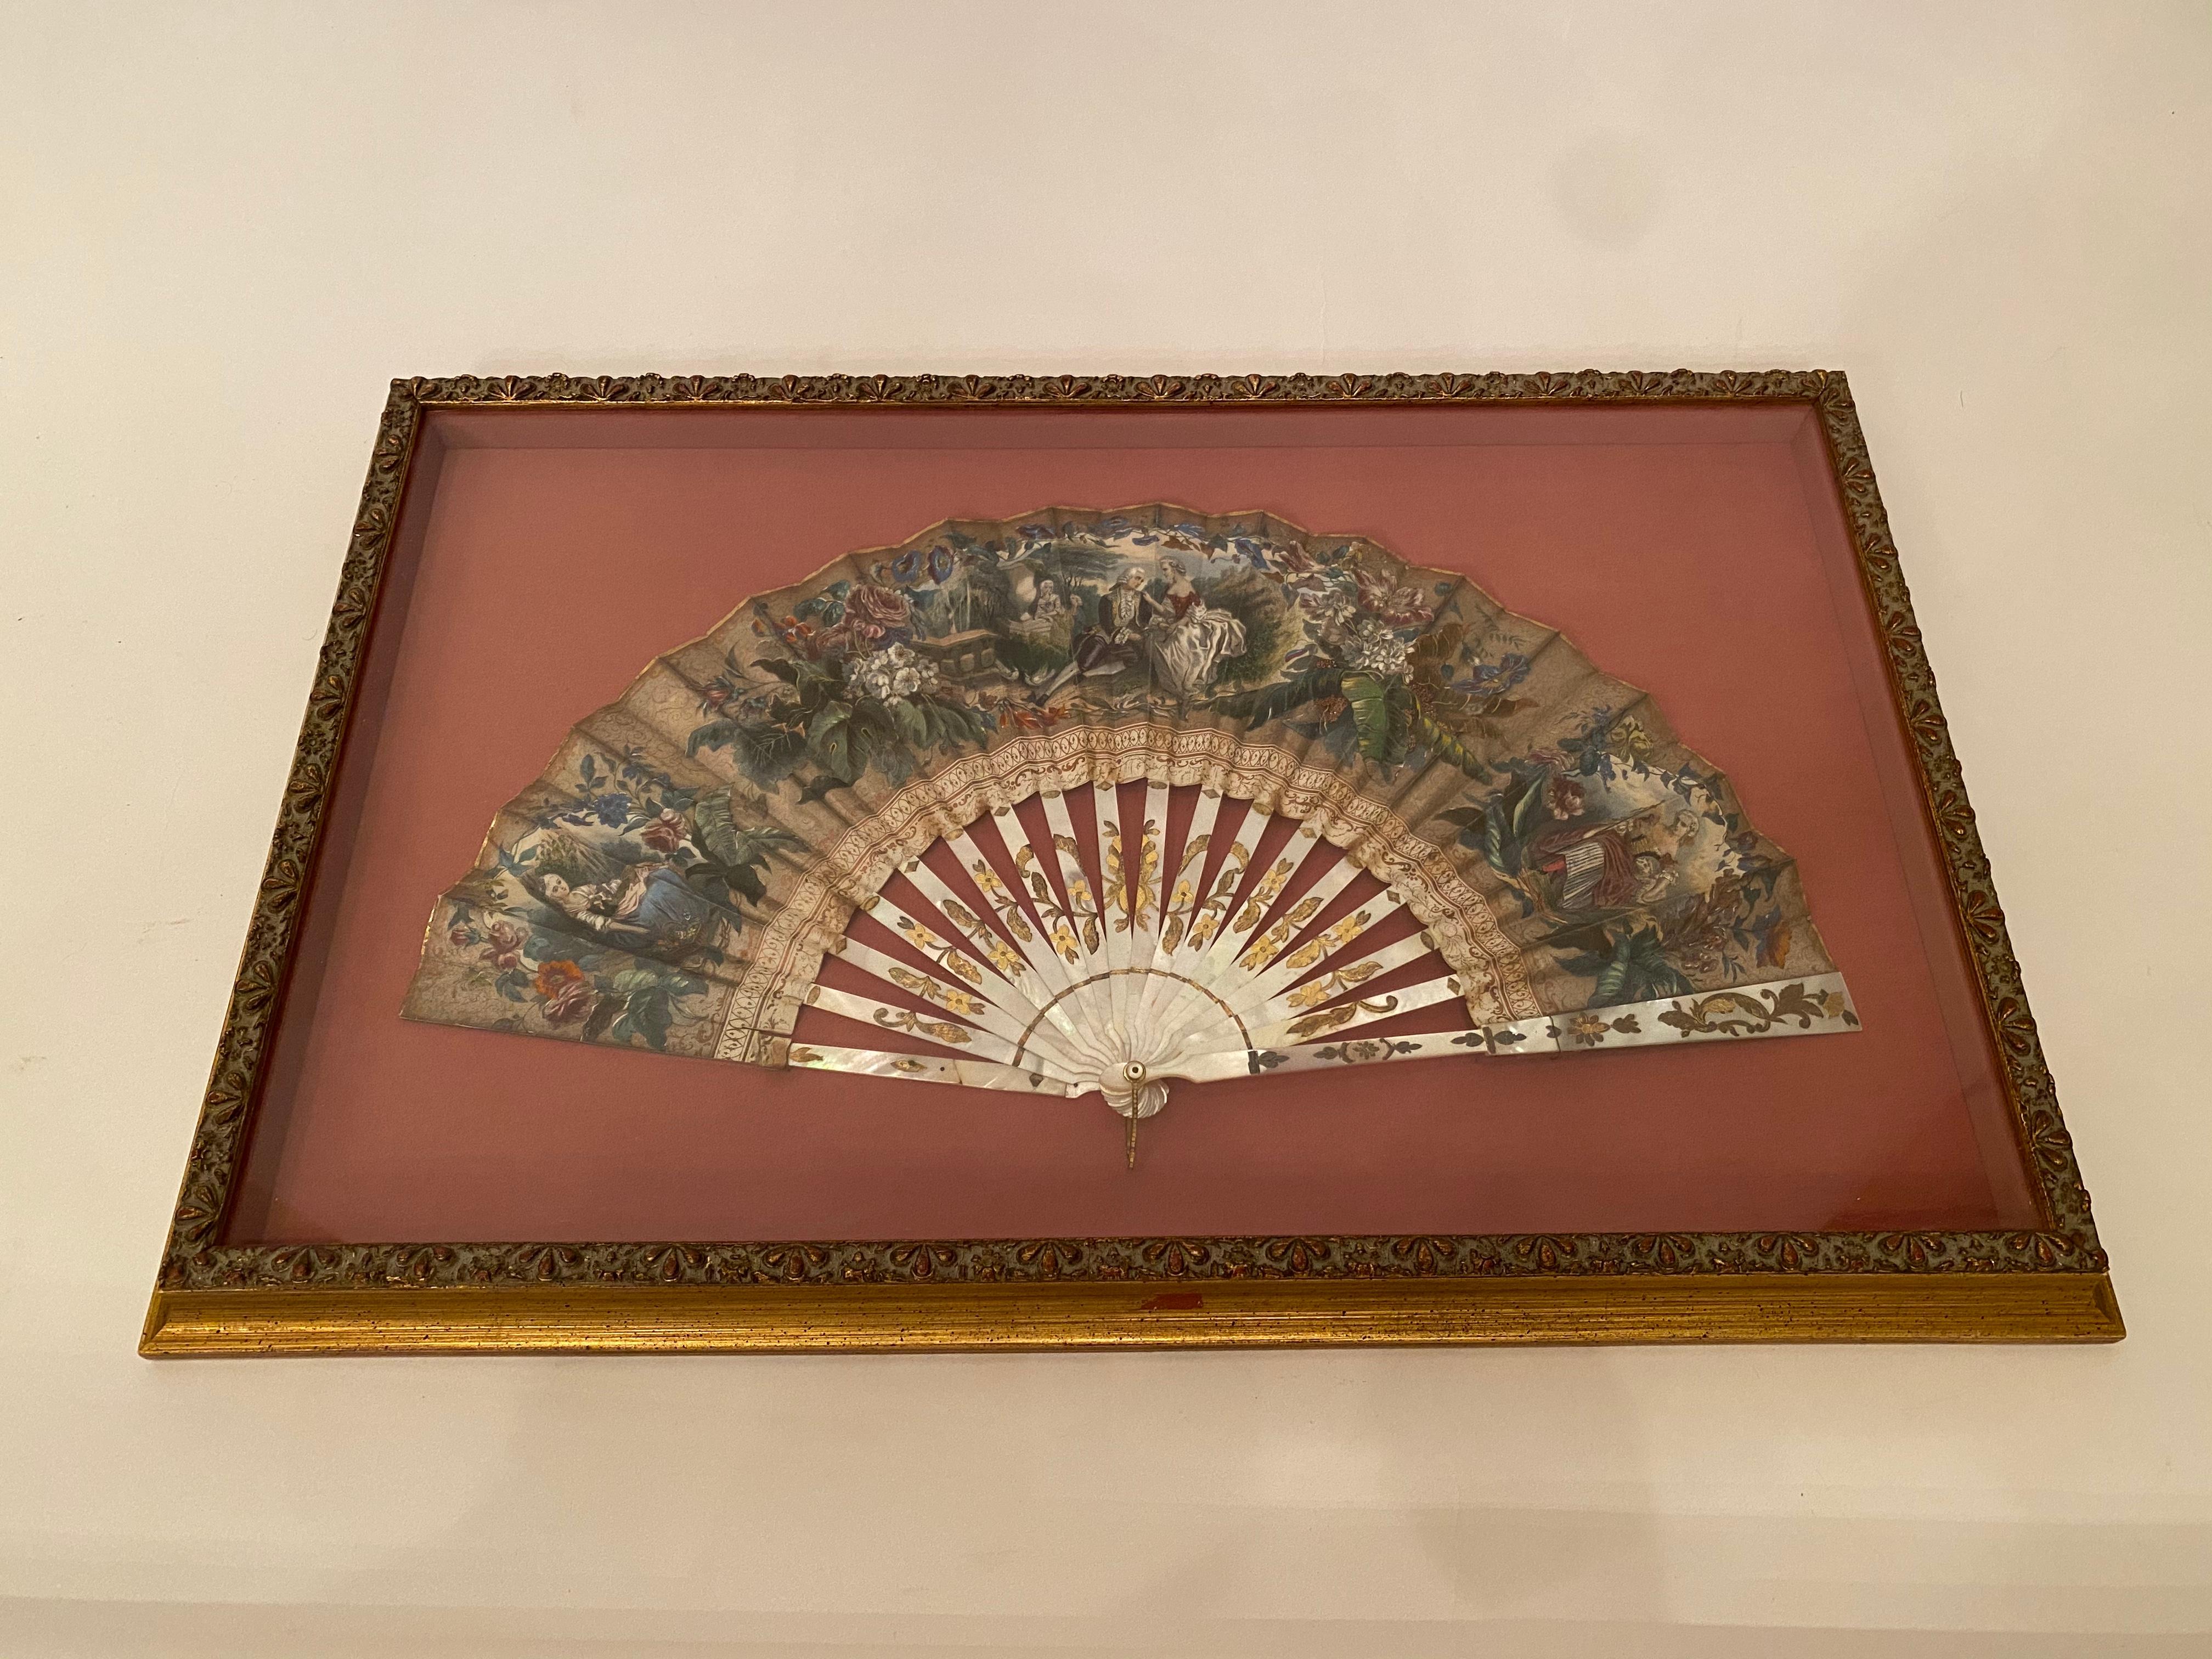 19th century French painted paper and mother of pearl fan, shadow-box framed antique ladies fan, made of mother of pearl with a hand embellished regency-style lithograph, with gold leaf on the outer edge. The mother of pearl sticks have etched brass